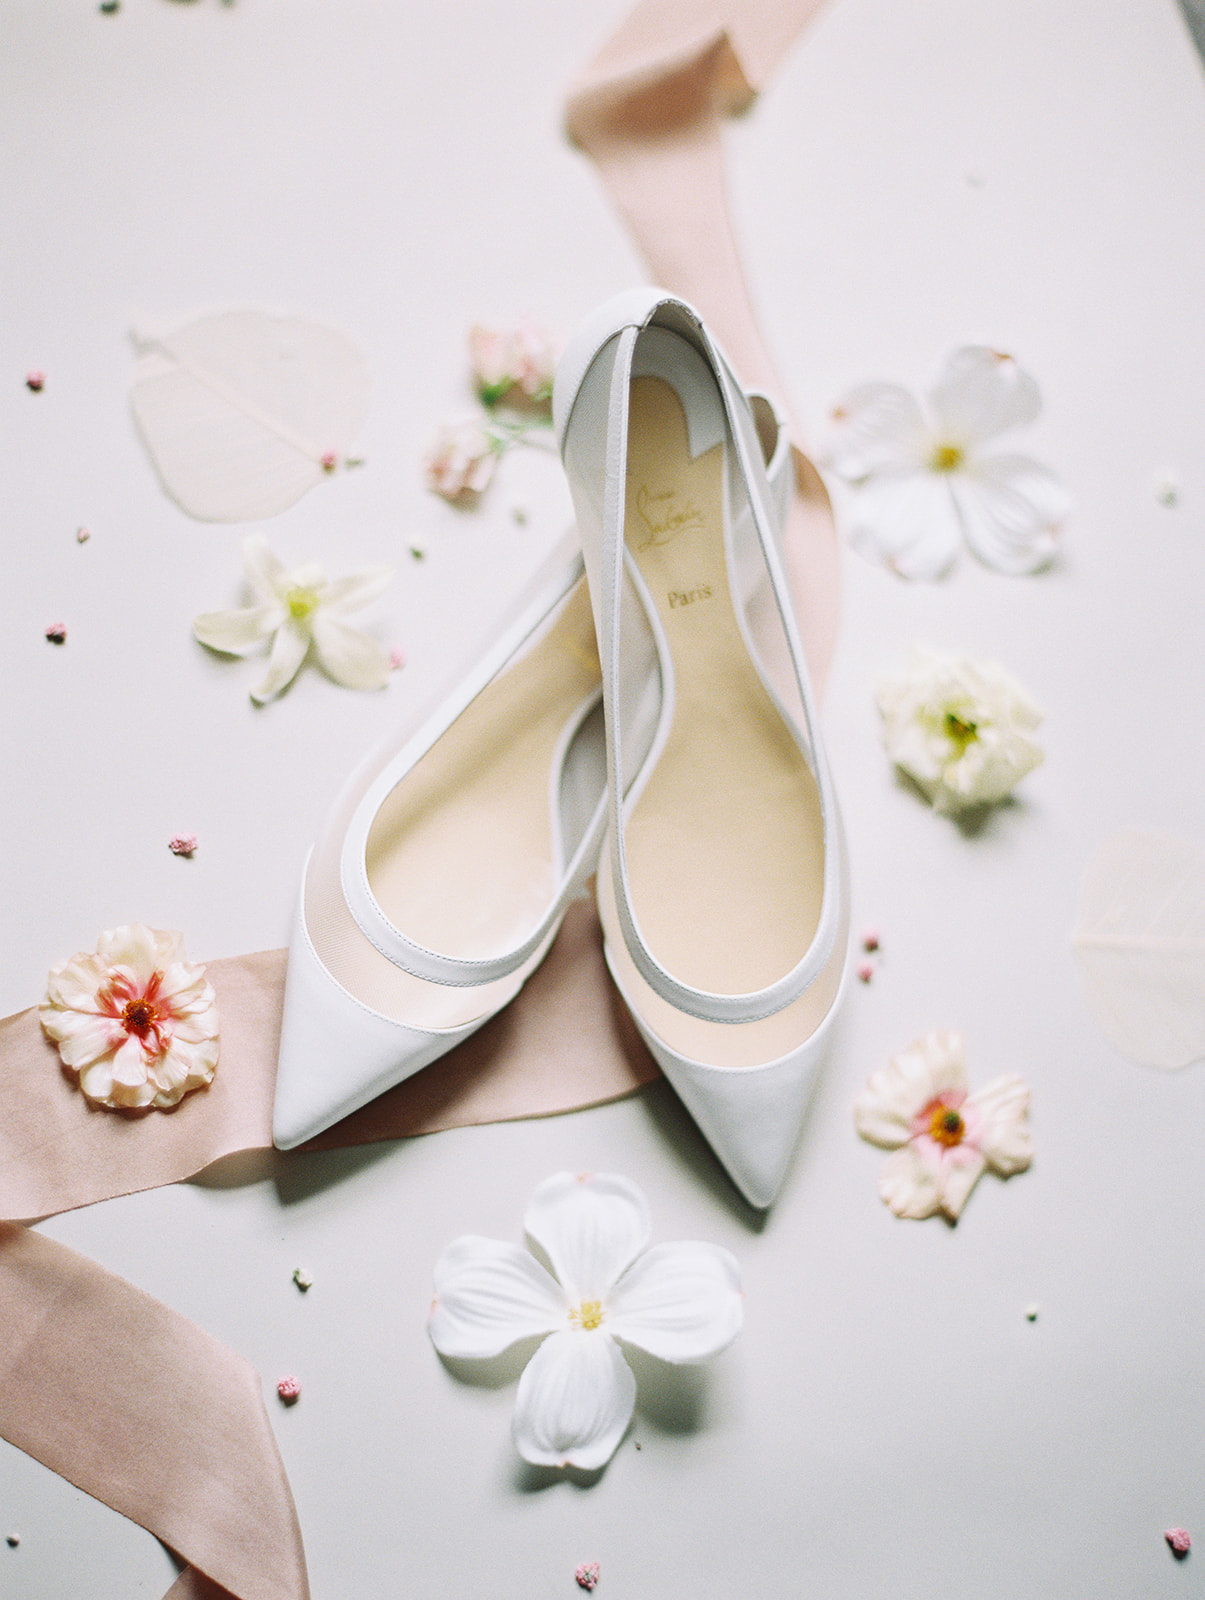 White Louboutin wedding flats surrounded by white and pink flowers